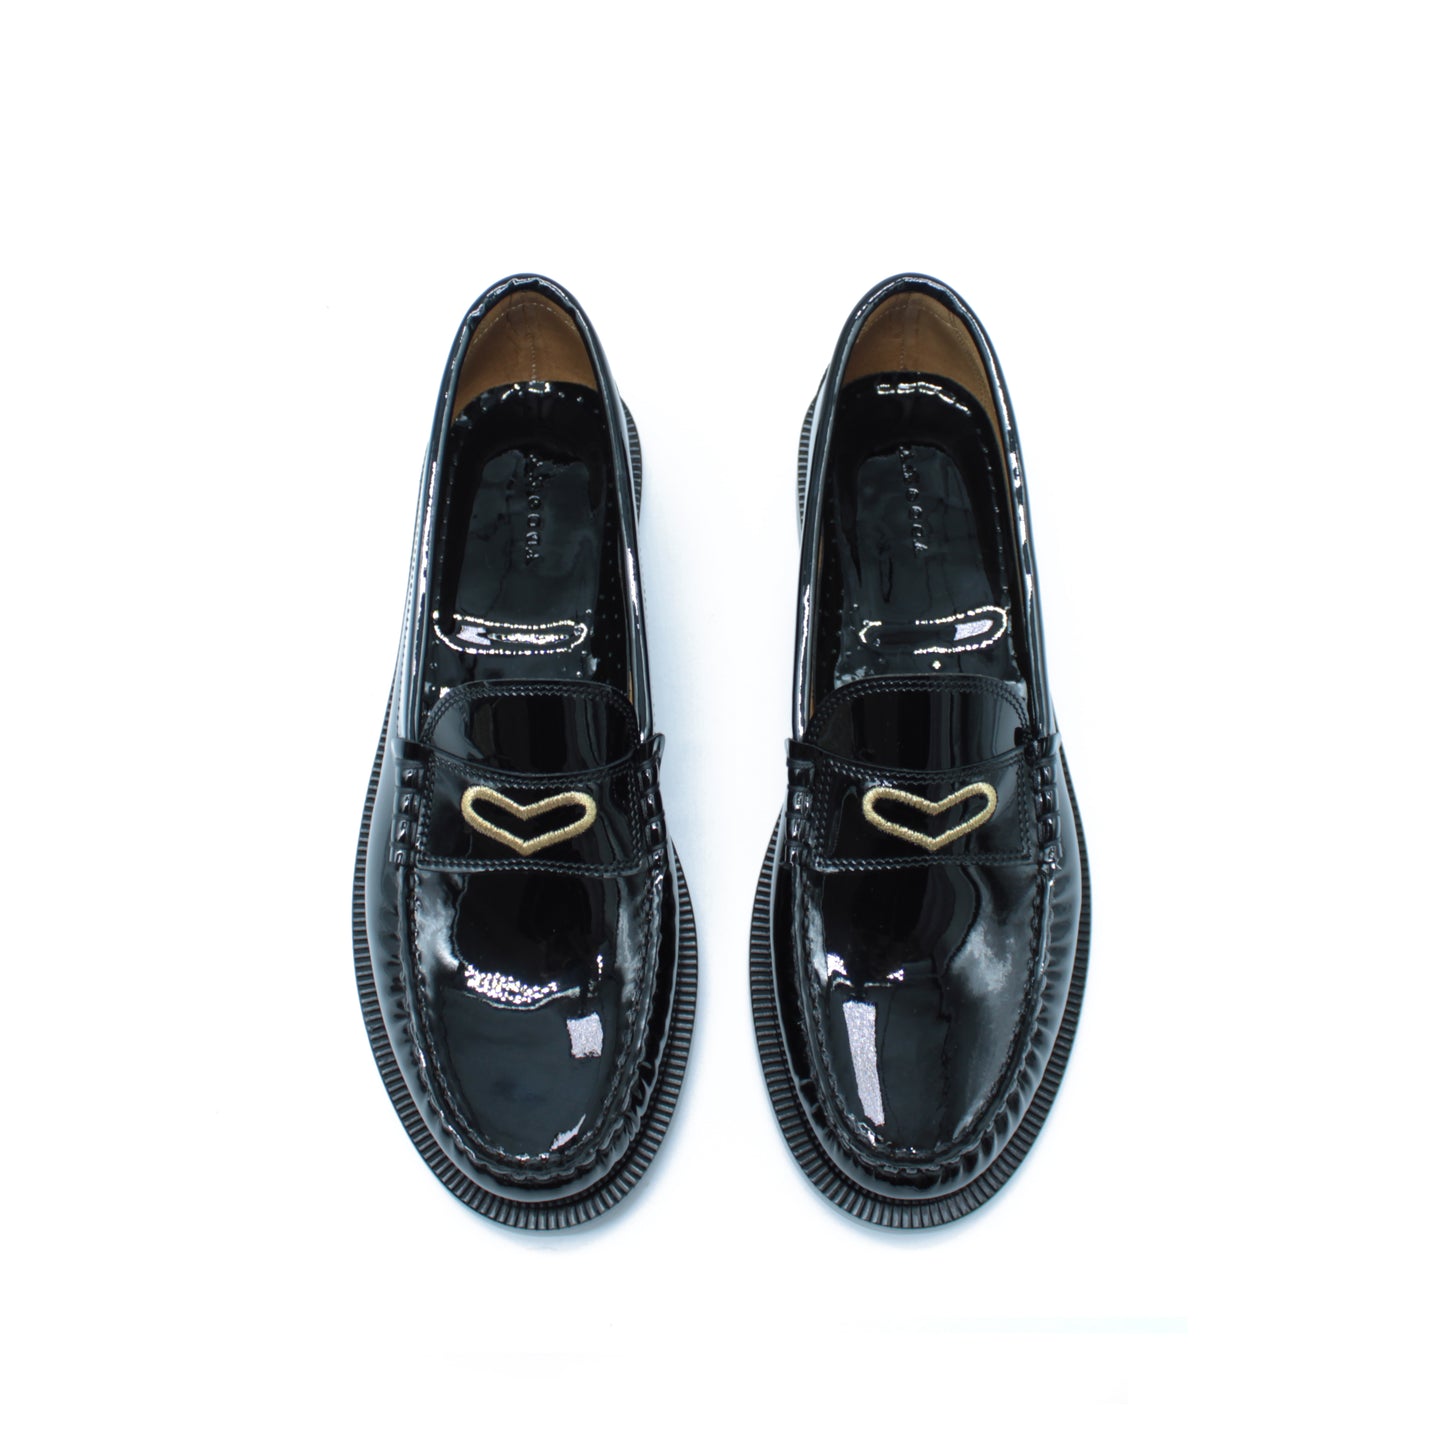 Moccasin in black patent leather